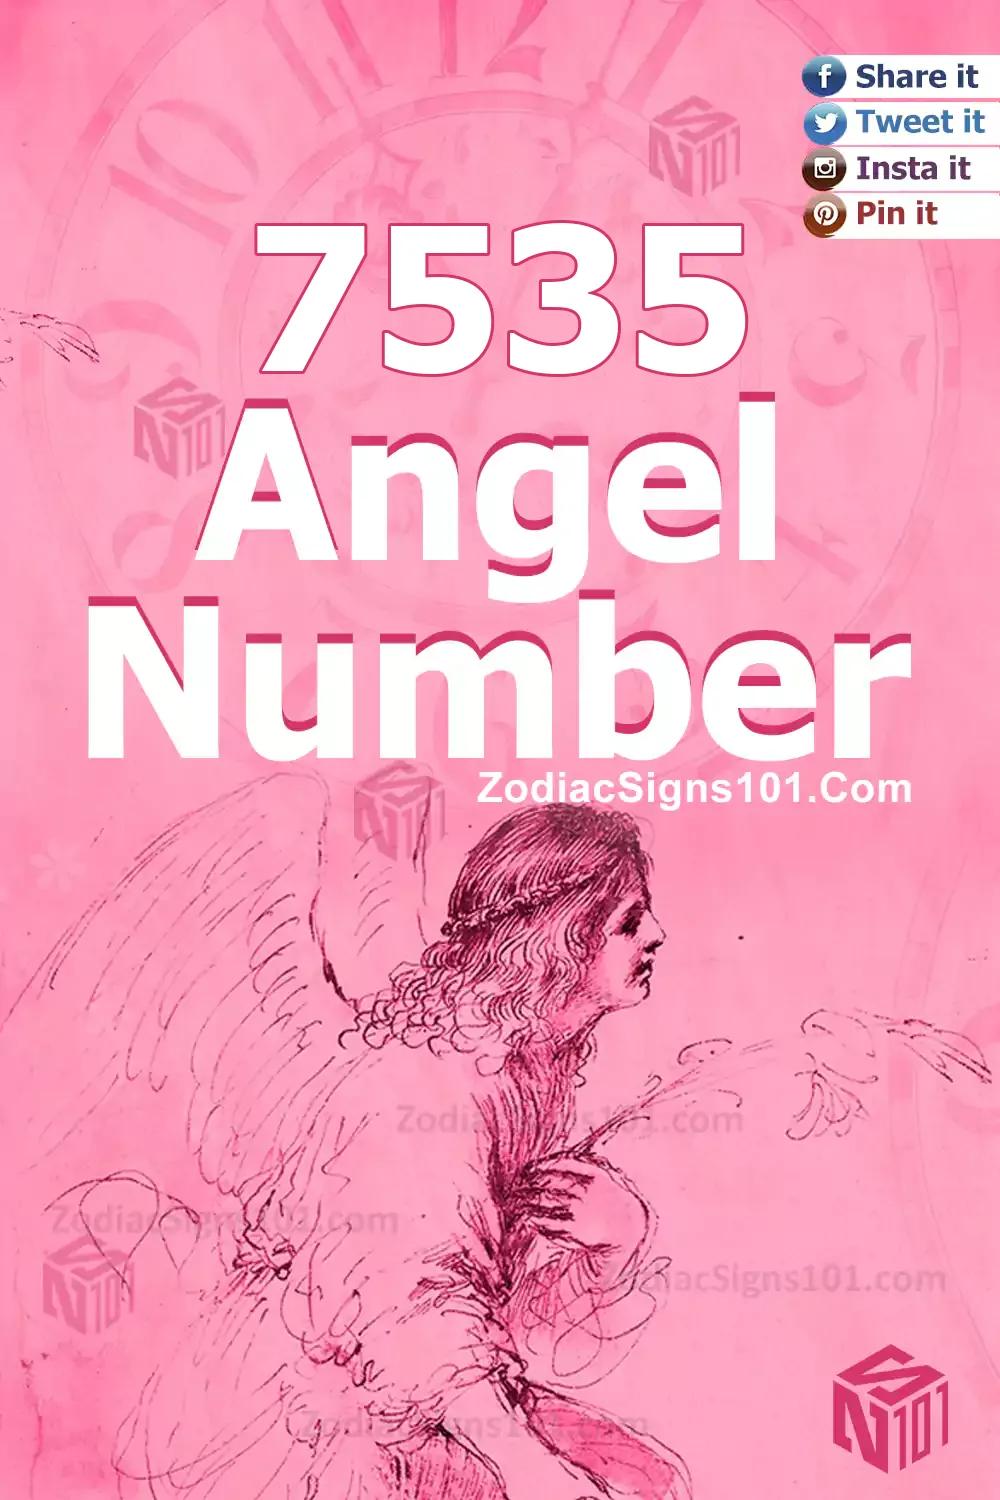 7535 Angel Number Meaning